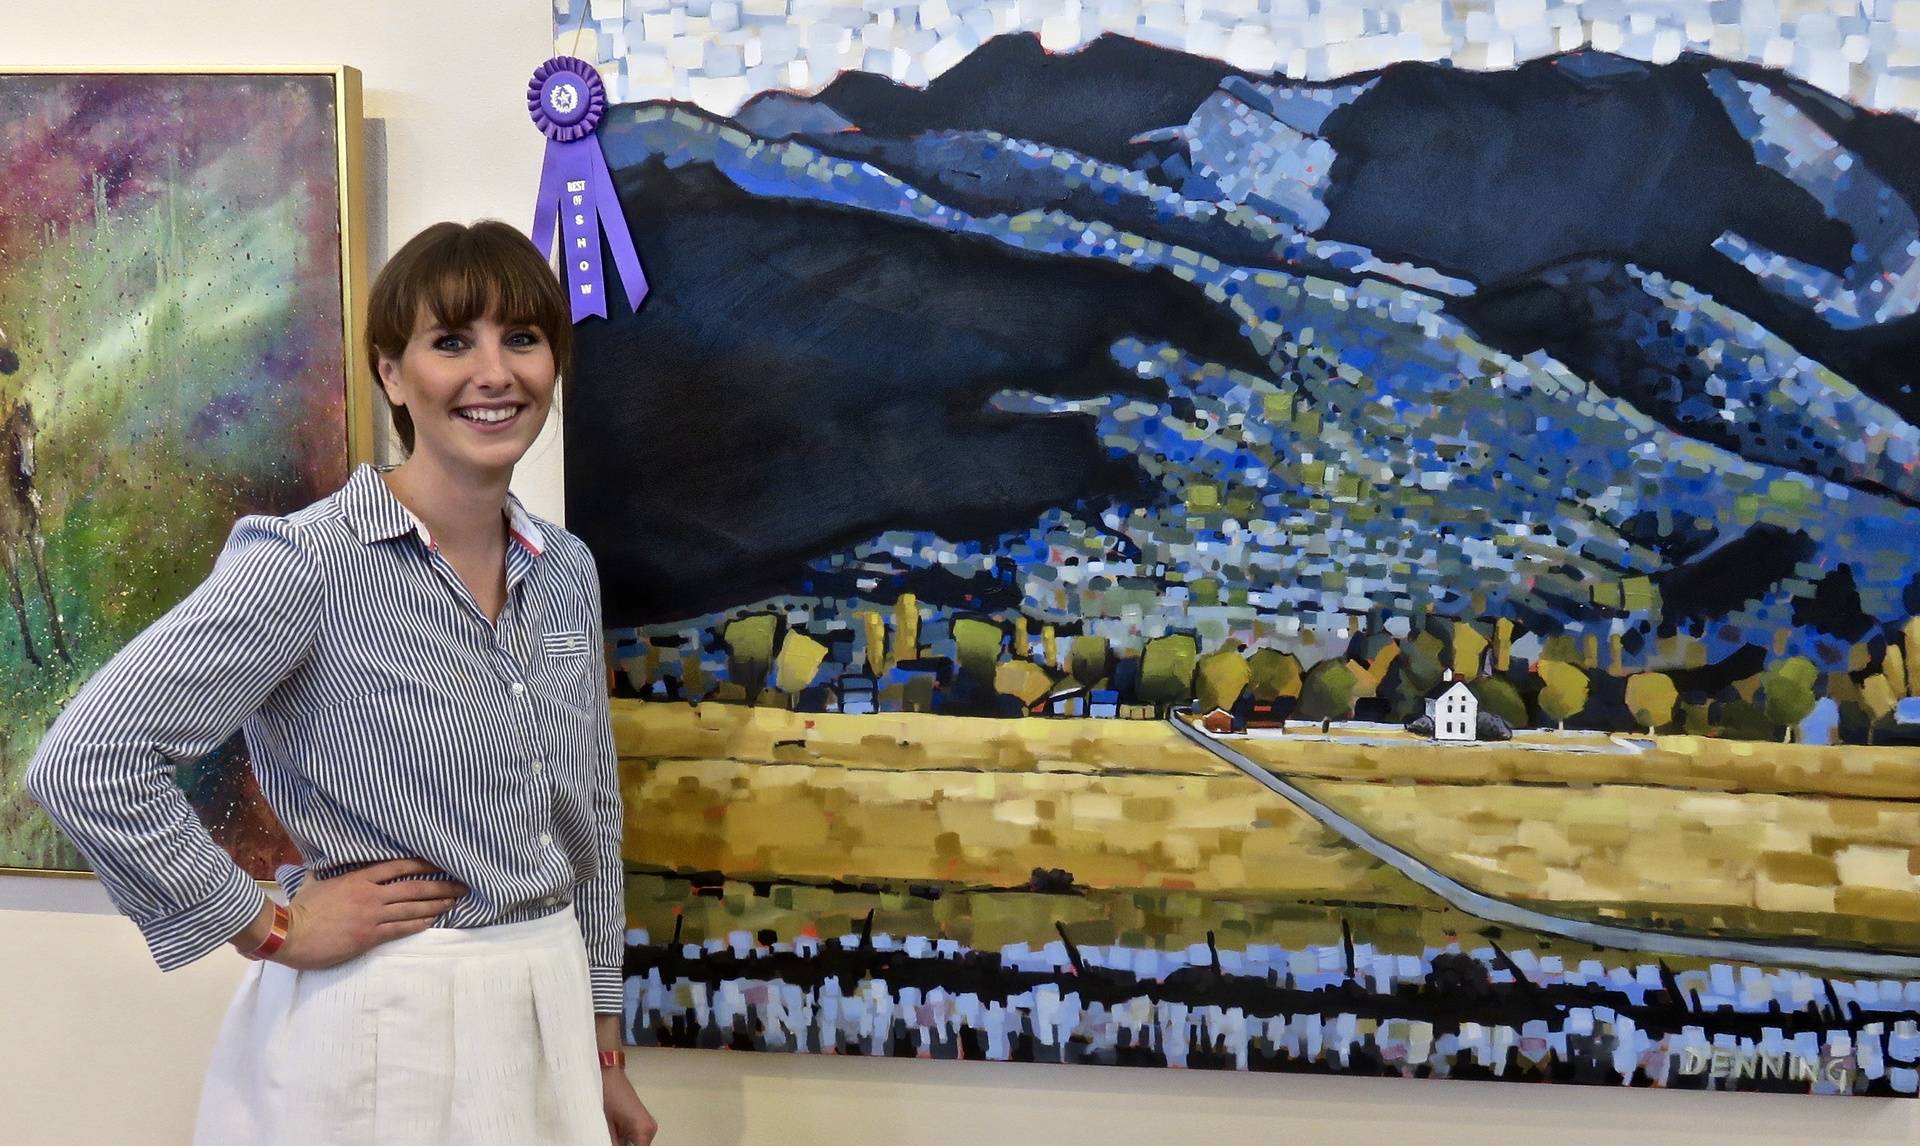 Victoria Denning with her Best of Show Painting